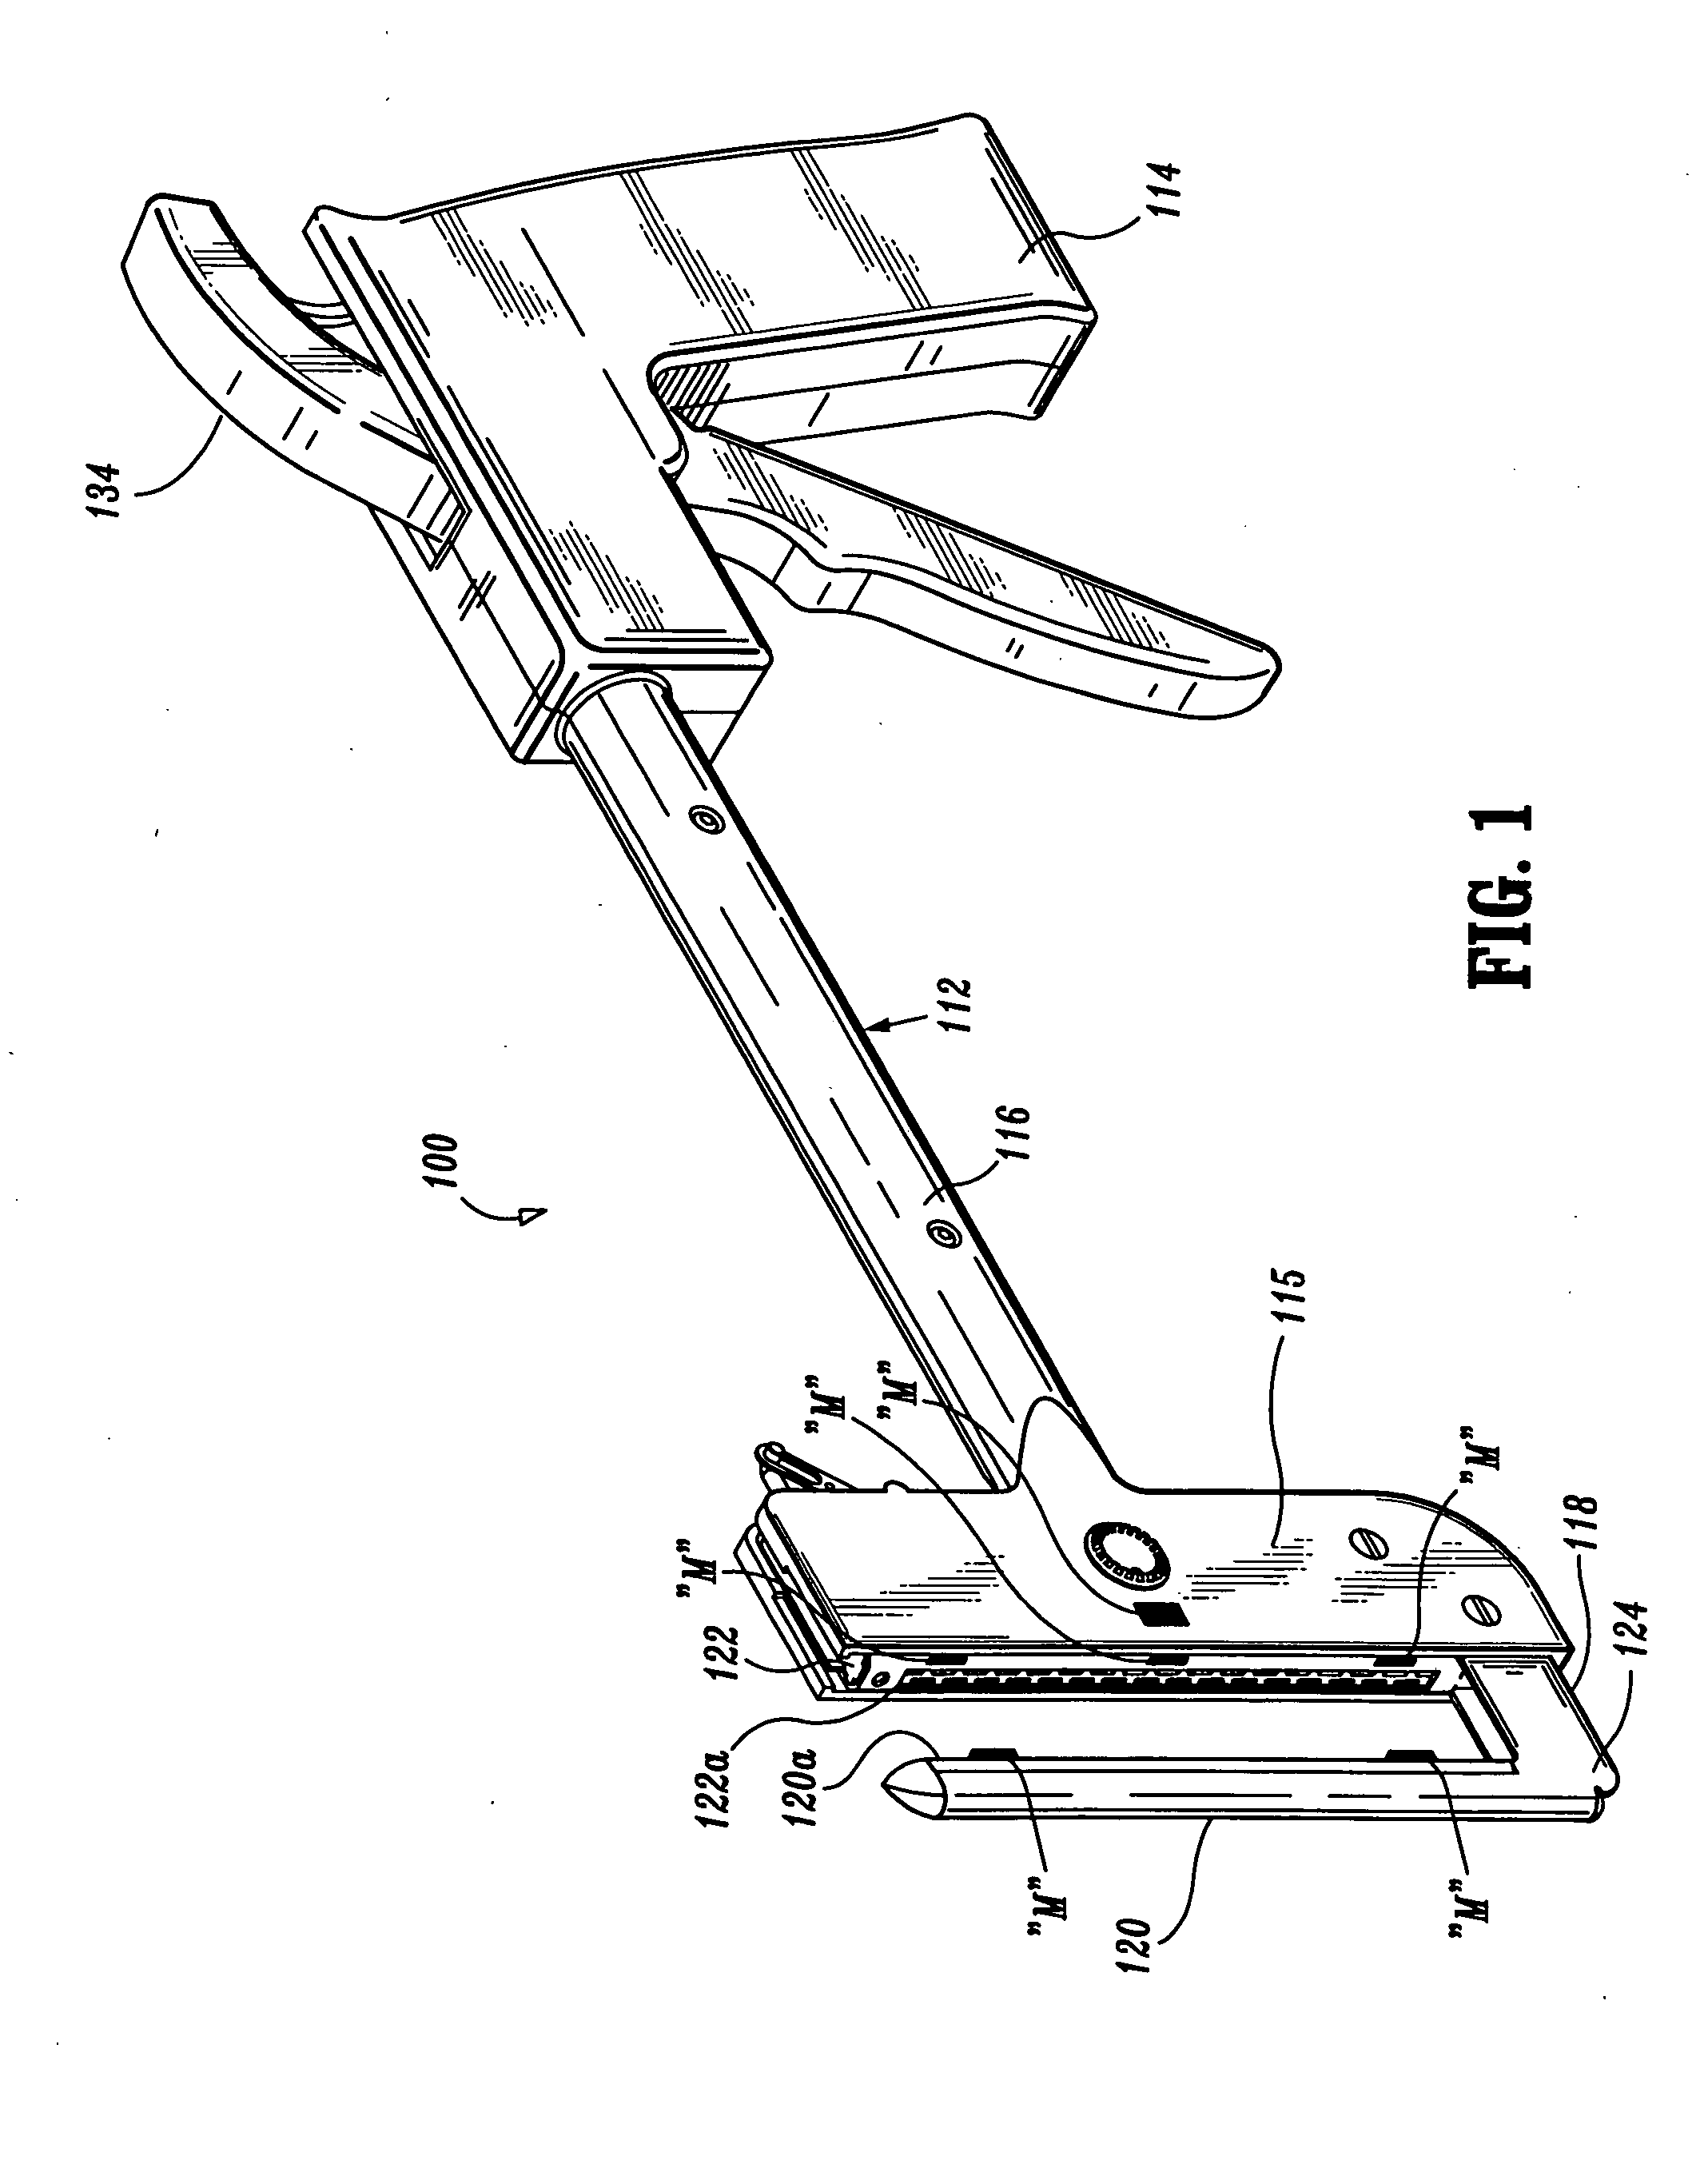 Surgical instruments including mems devices